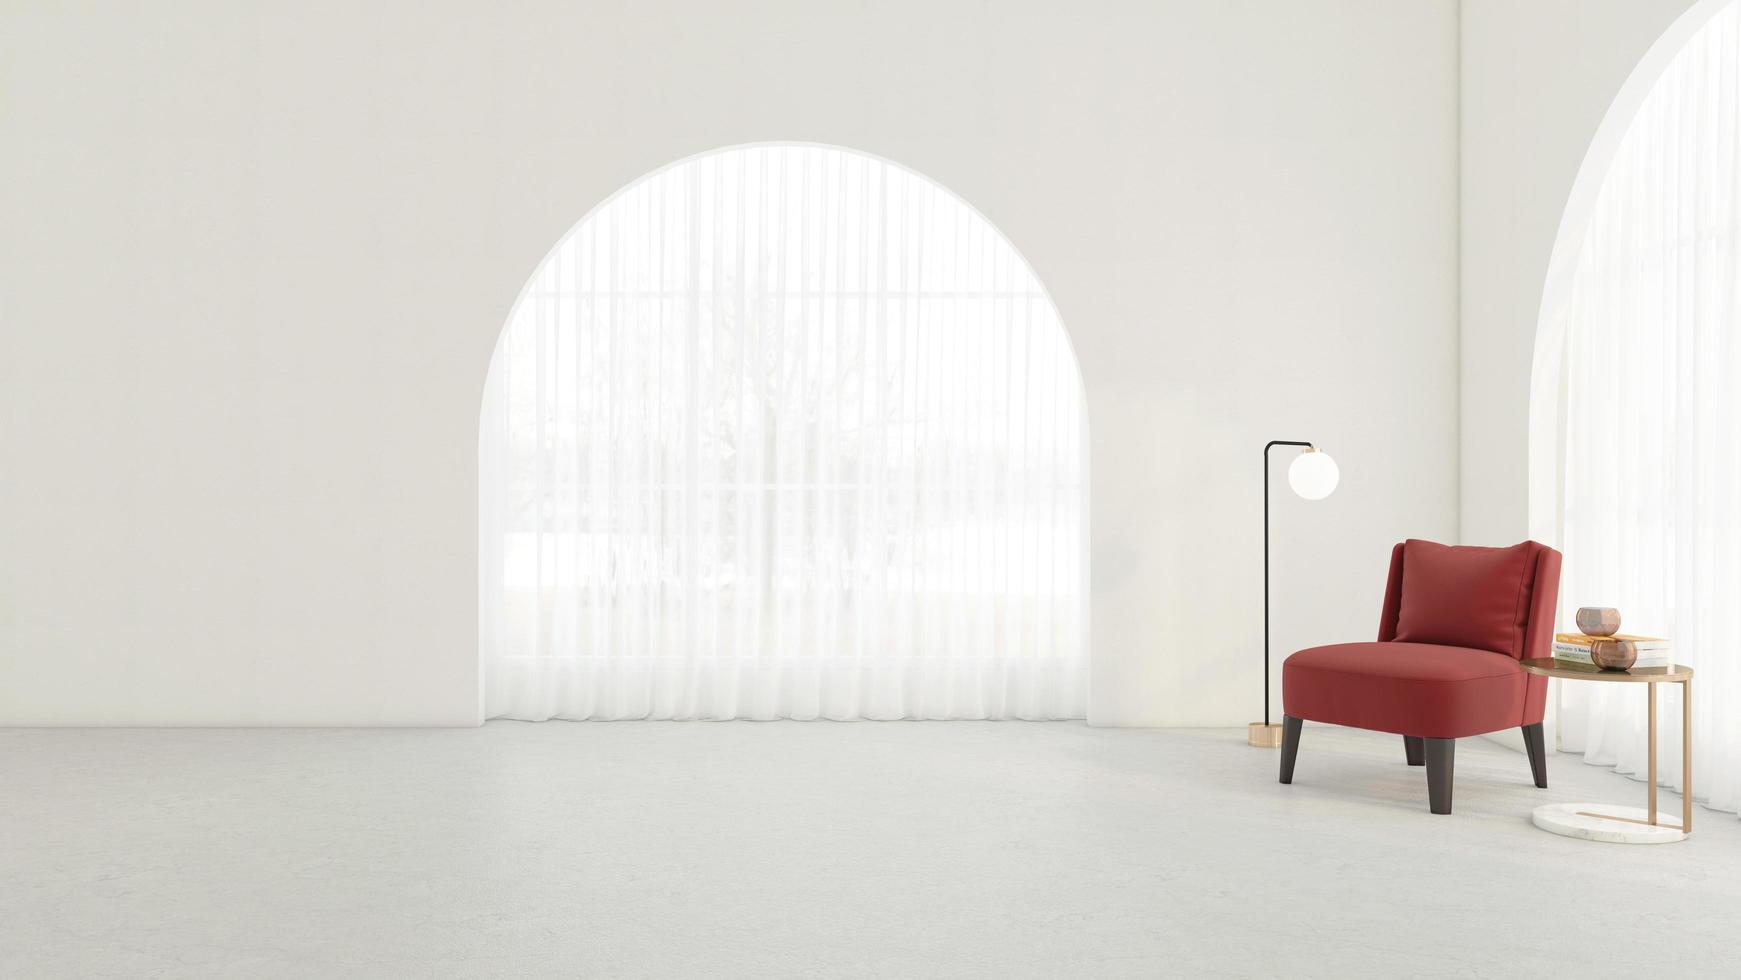 Empty room with arched window and white wall, luxury armchair and side table, floor lamp. 3D rendering photo